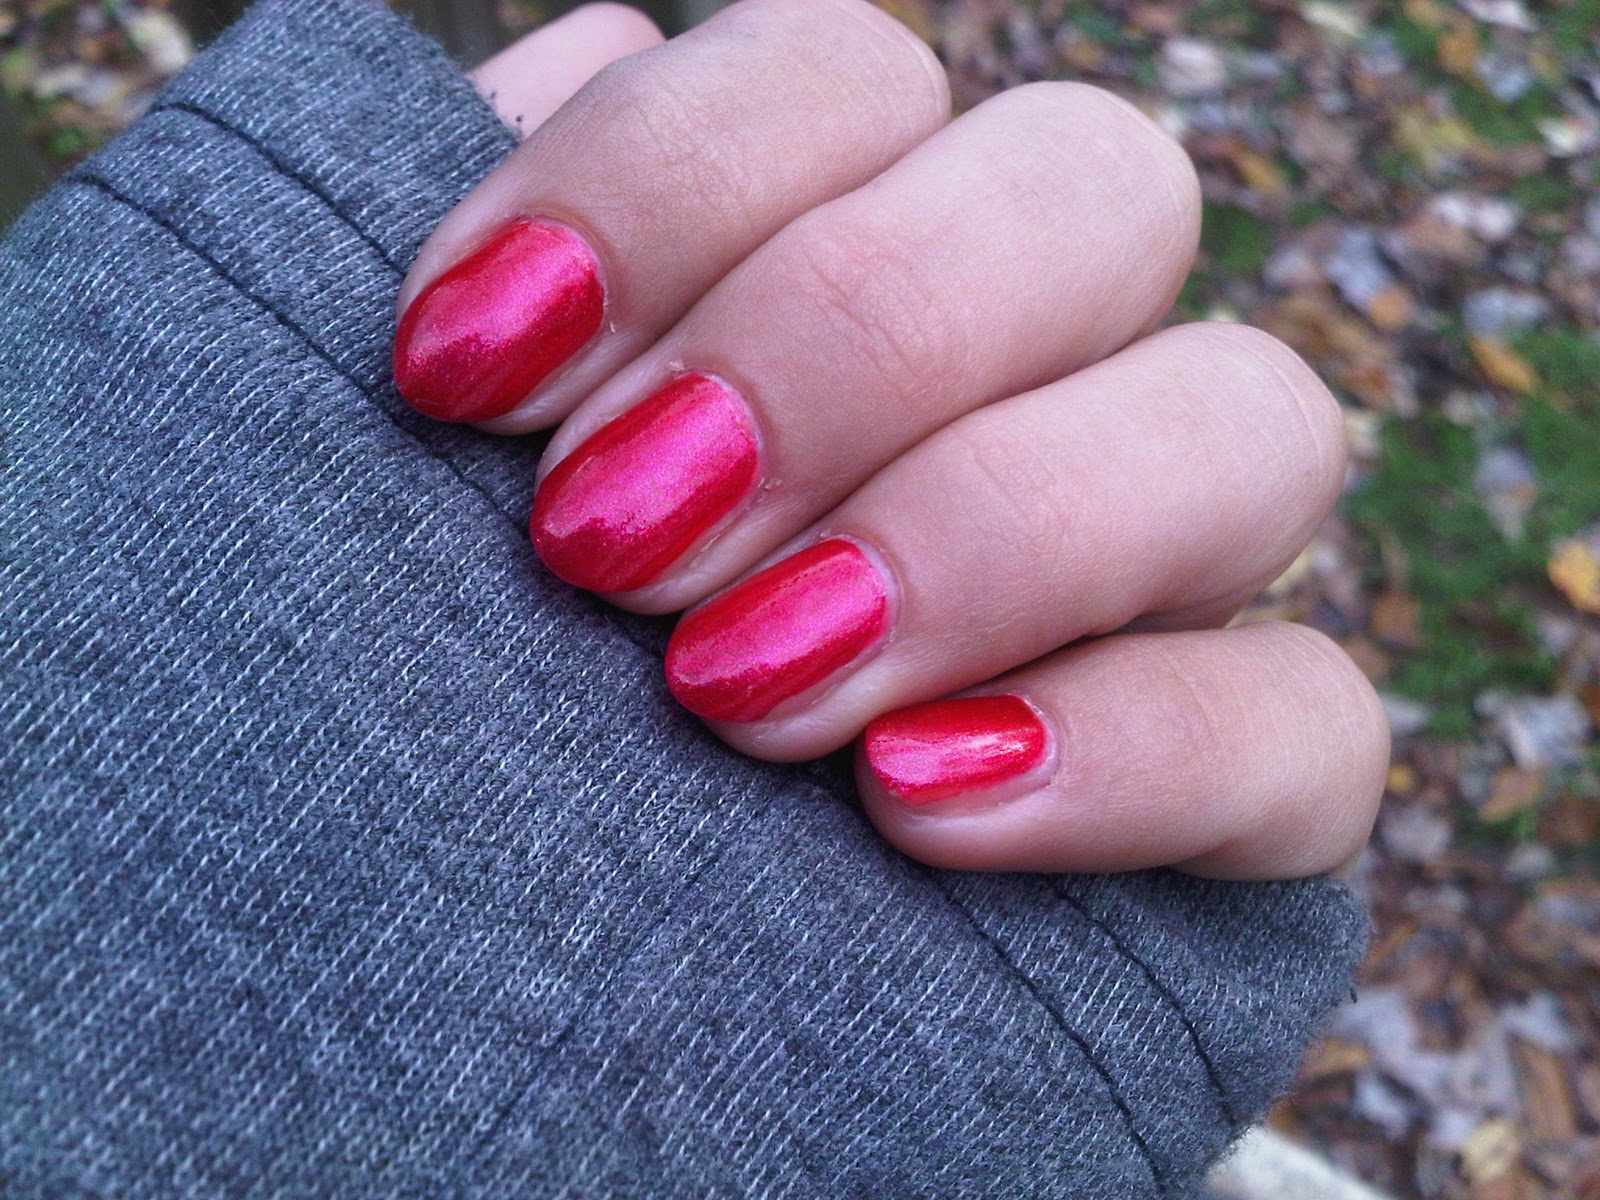 6. China Glaze Nail Lacquer in "Rose Among Thorns" - wide 3